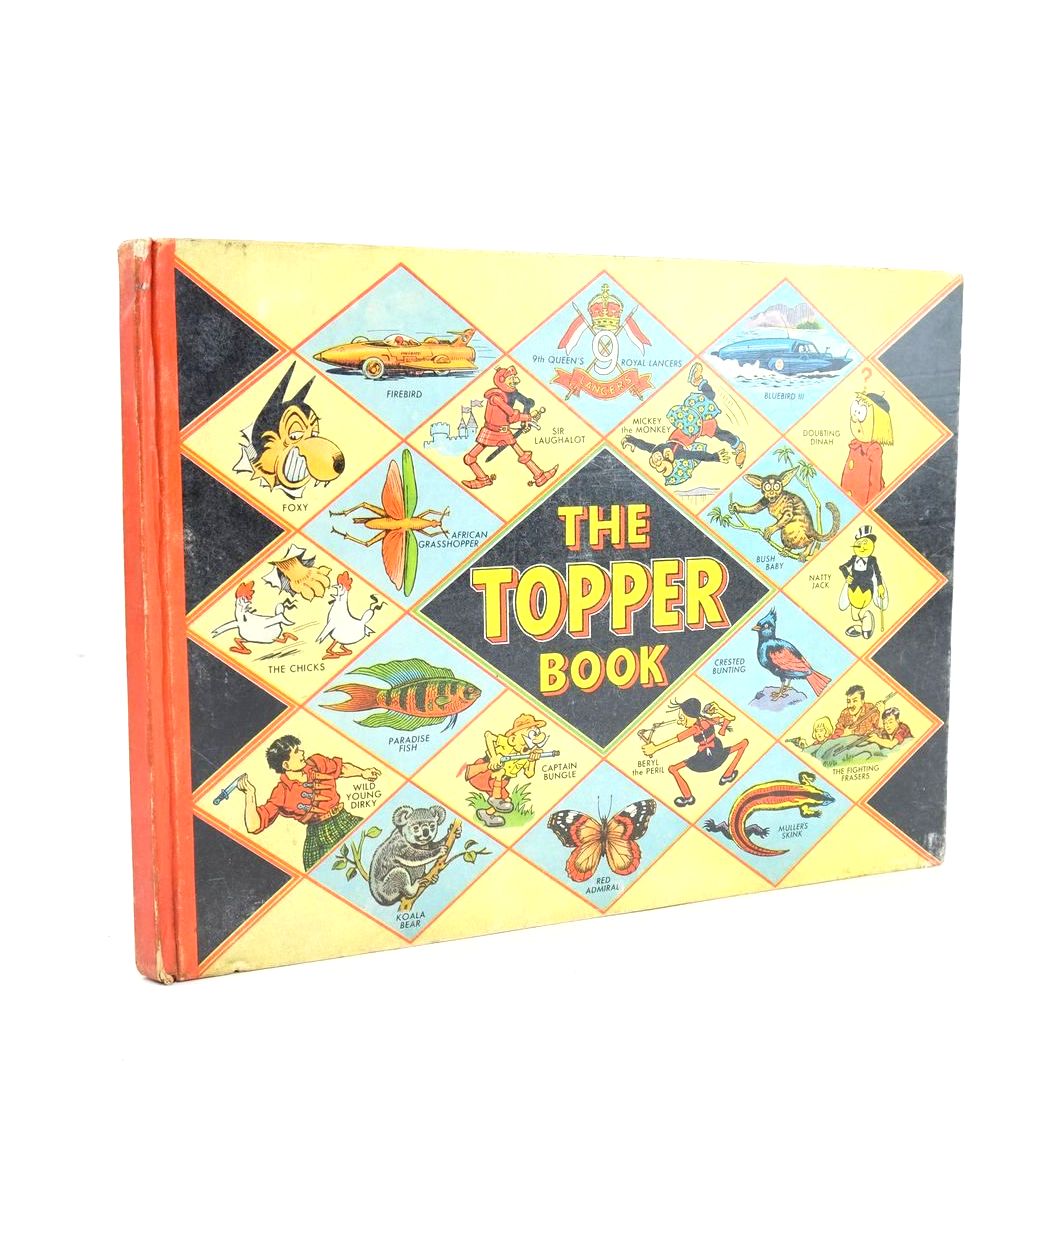 Photo of THE TOPPER BOOK 1958 published by D.C. Thomson & Co Ltd., John Leng (STOCK CODE: 1325837)  for sale by Stella & Rose's Books